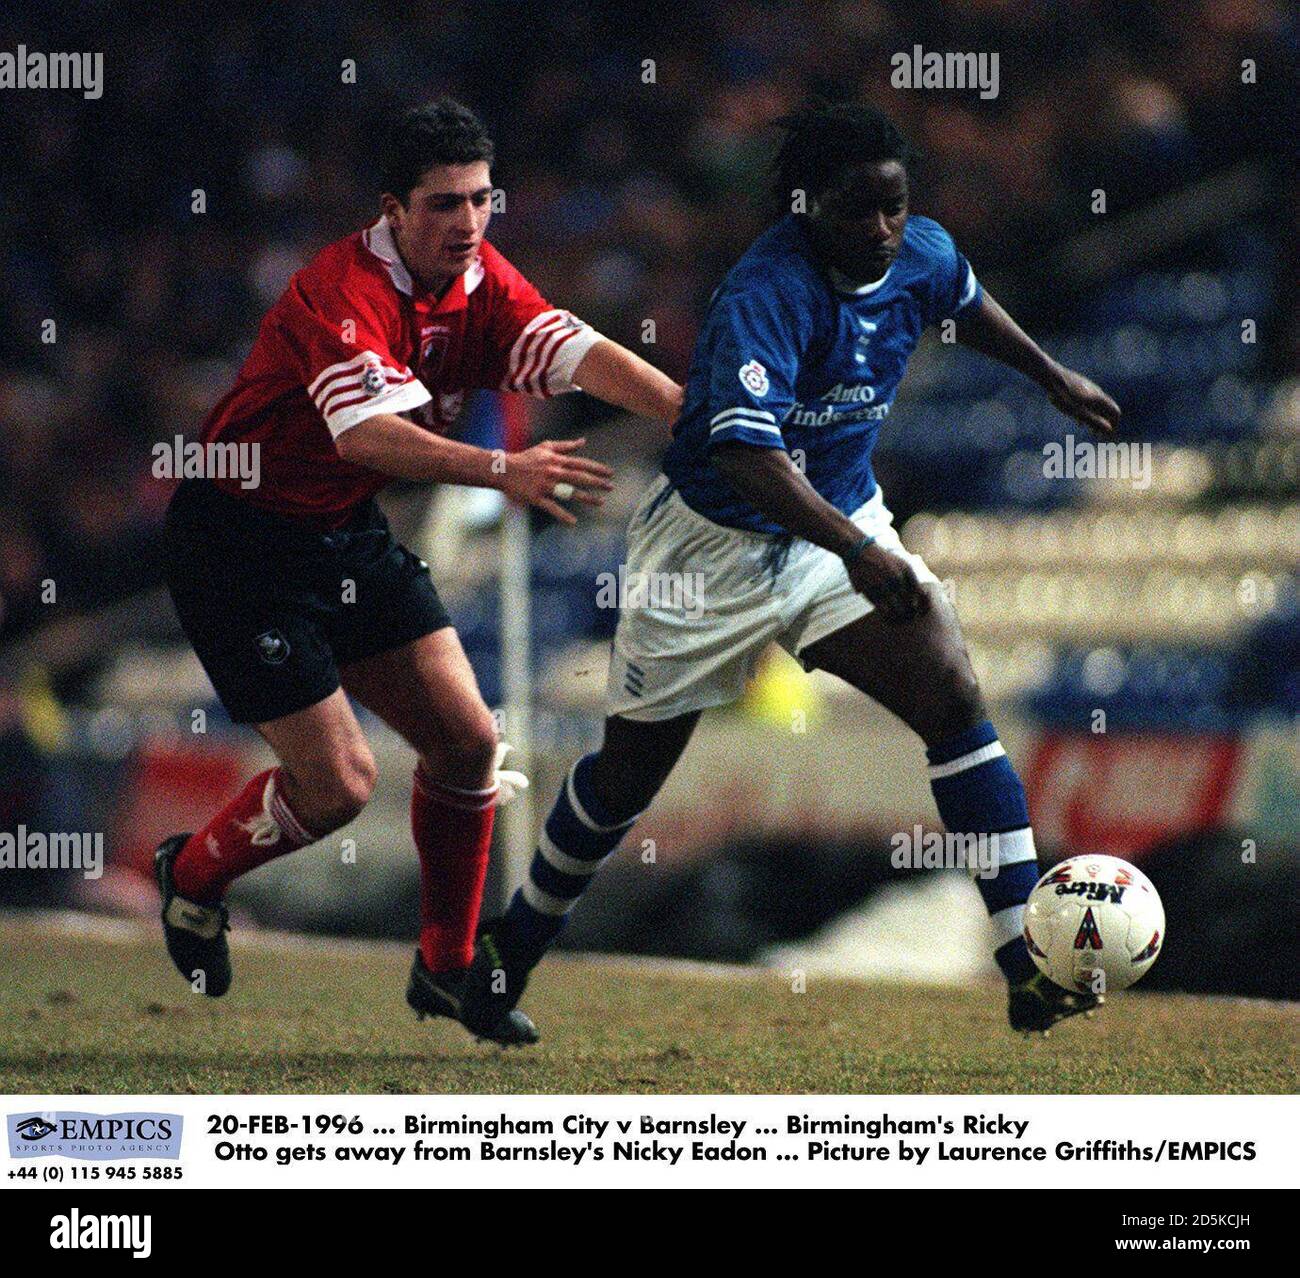 20-FEB-1996 ... Birmingham City v Barnsley ... Birmingham's Ricky Otto gets away from Barnsley's Nicky Eadon ... Picture by Laurence Griffiths/EMPICS Stock Photo